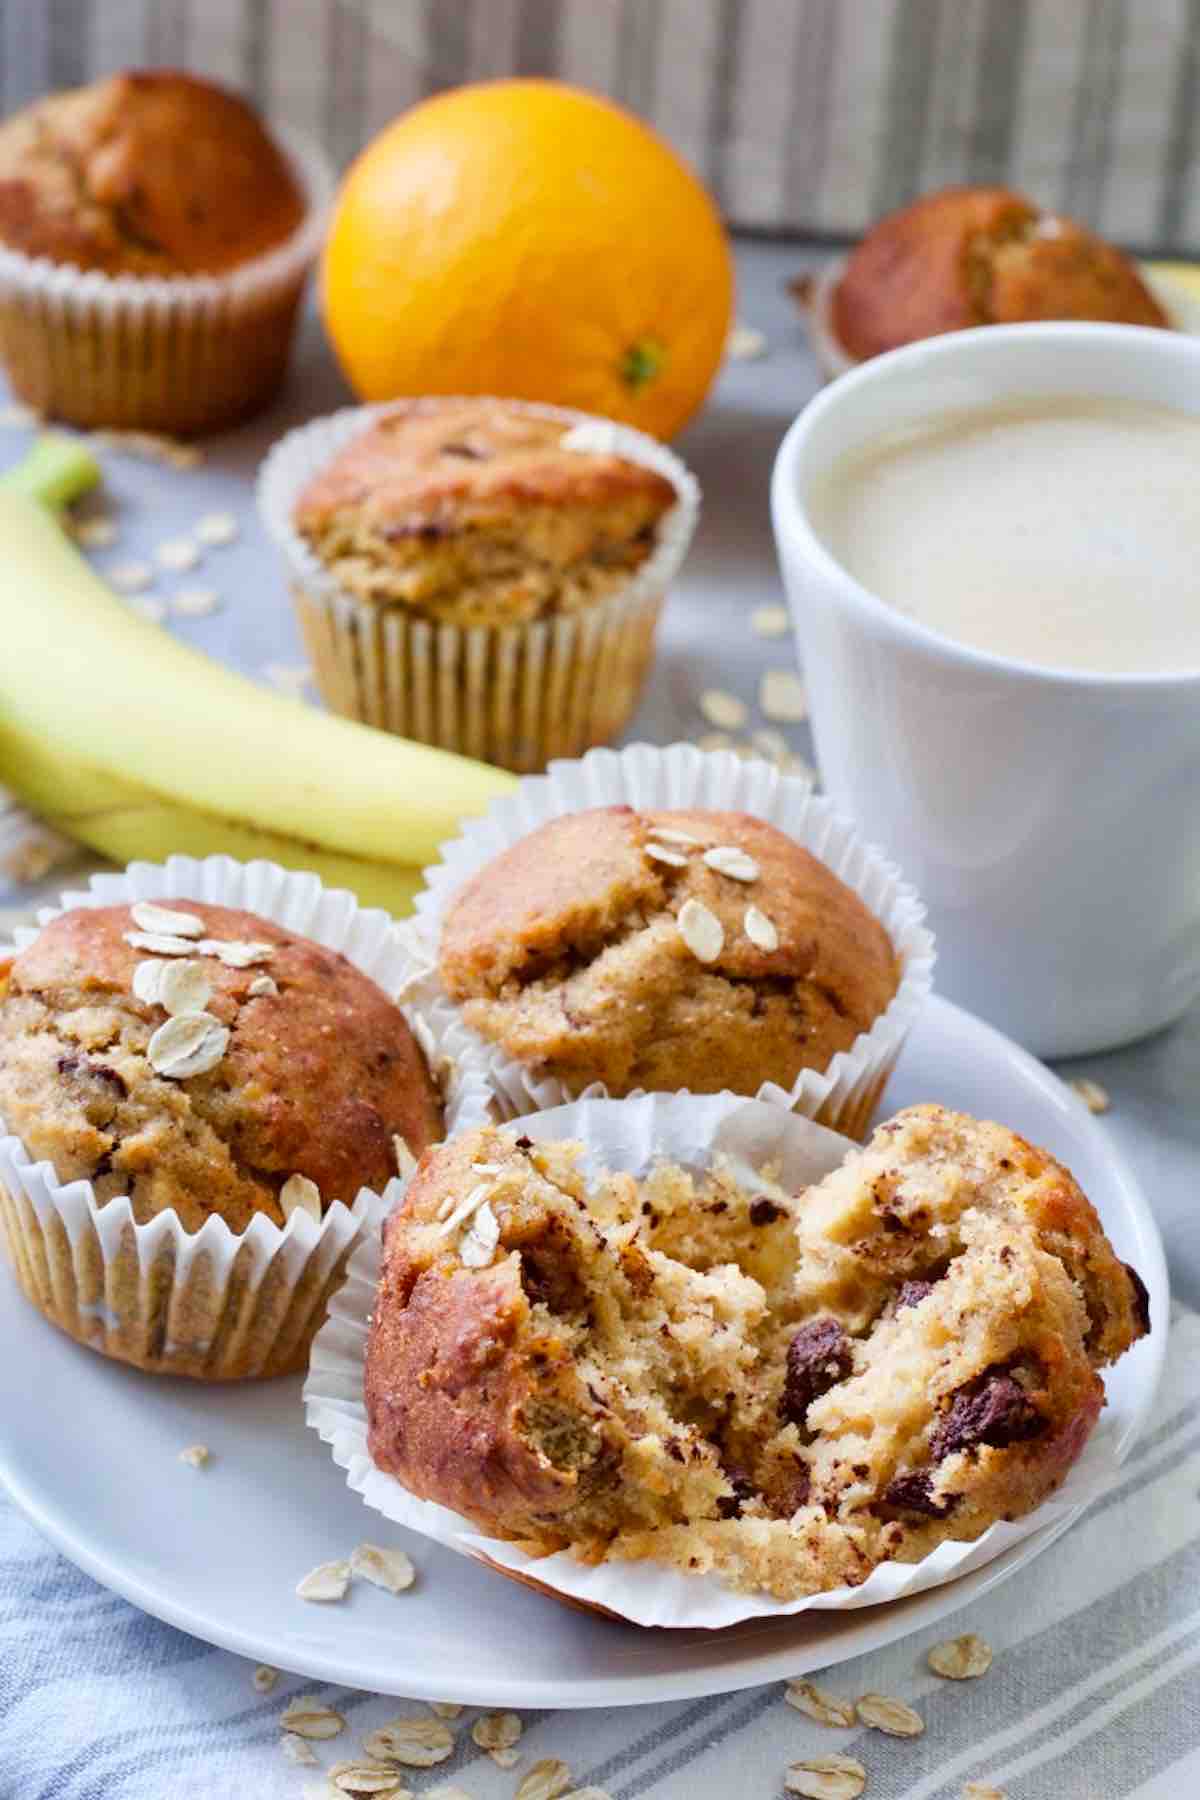 Banana muffins on a plate, one torn in half.